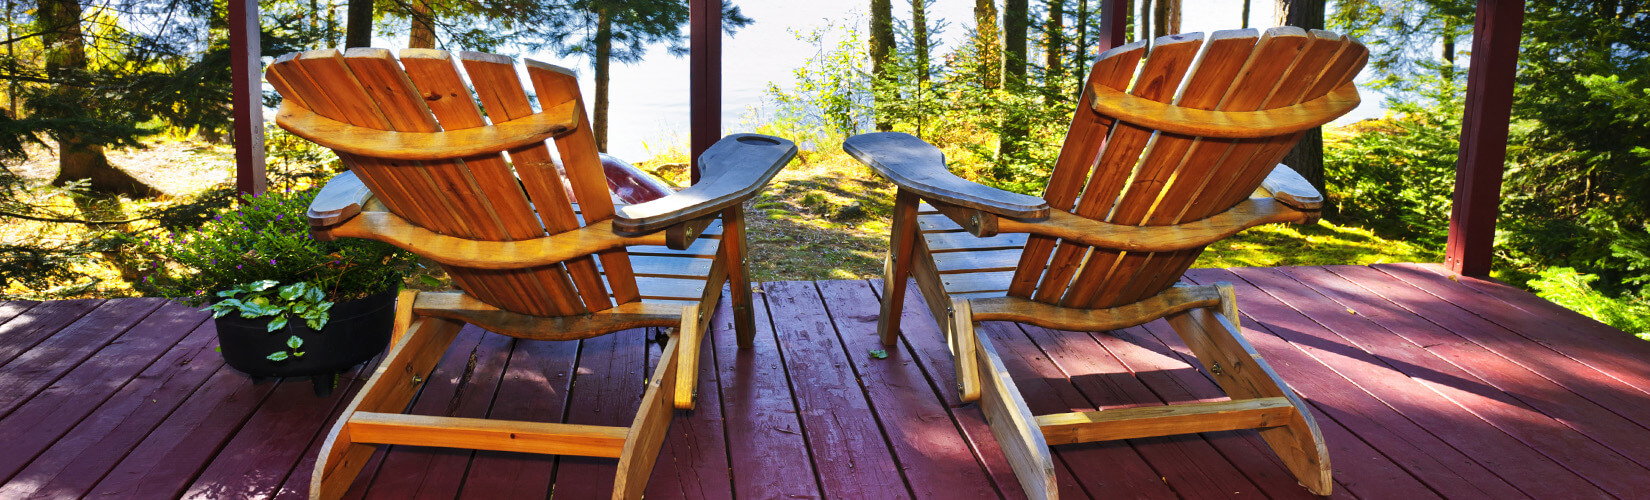 Plan a Great Escape with These 10+ Ontario Cottage Rentals :: I've Been Bit! Travel Blog